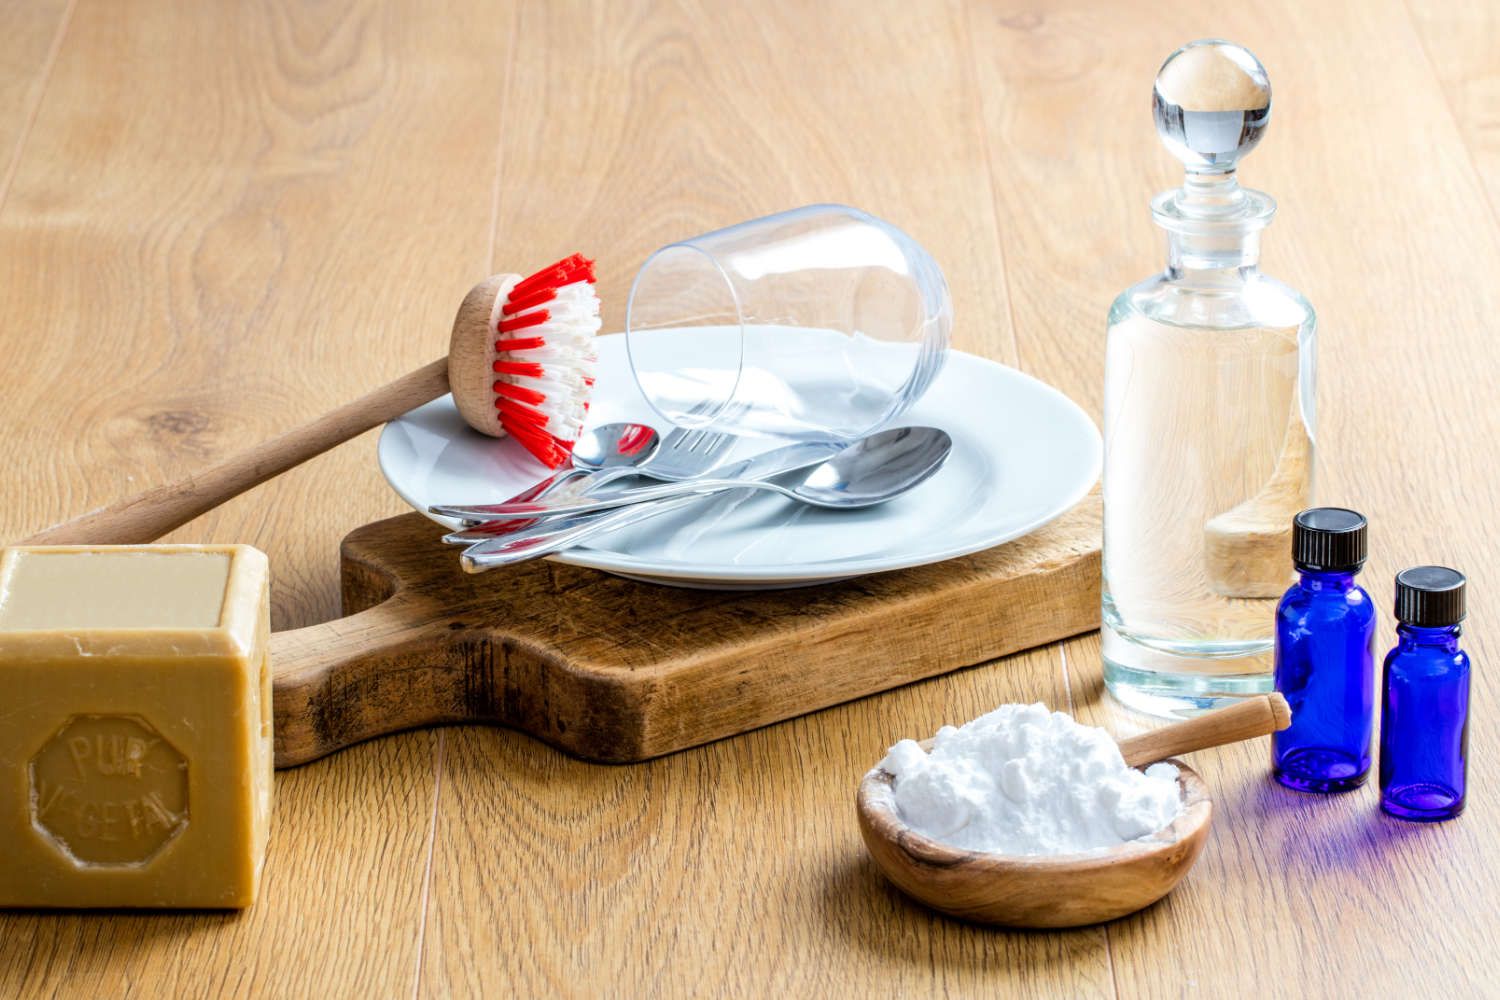 How to make homemade dish soap